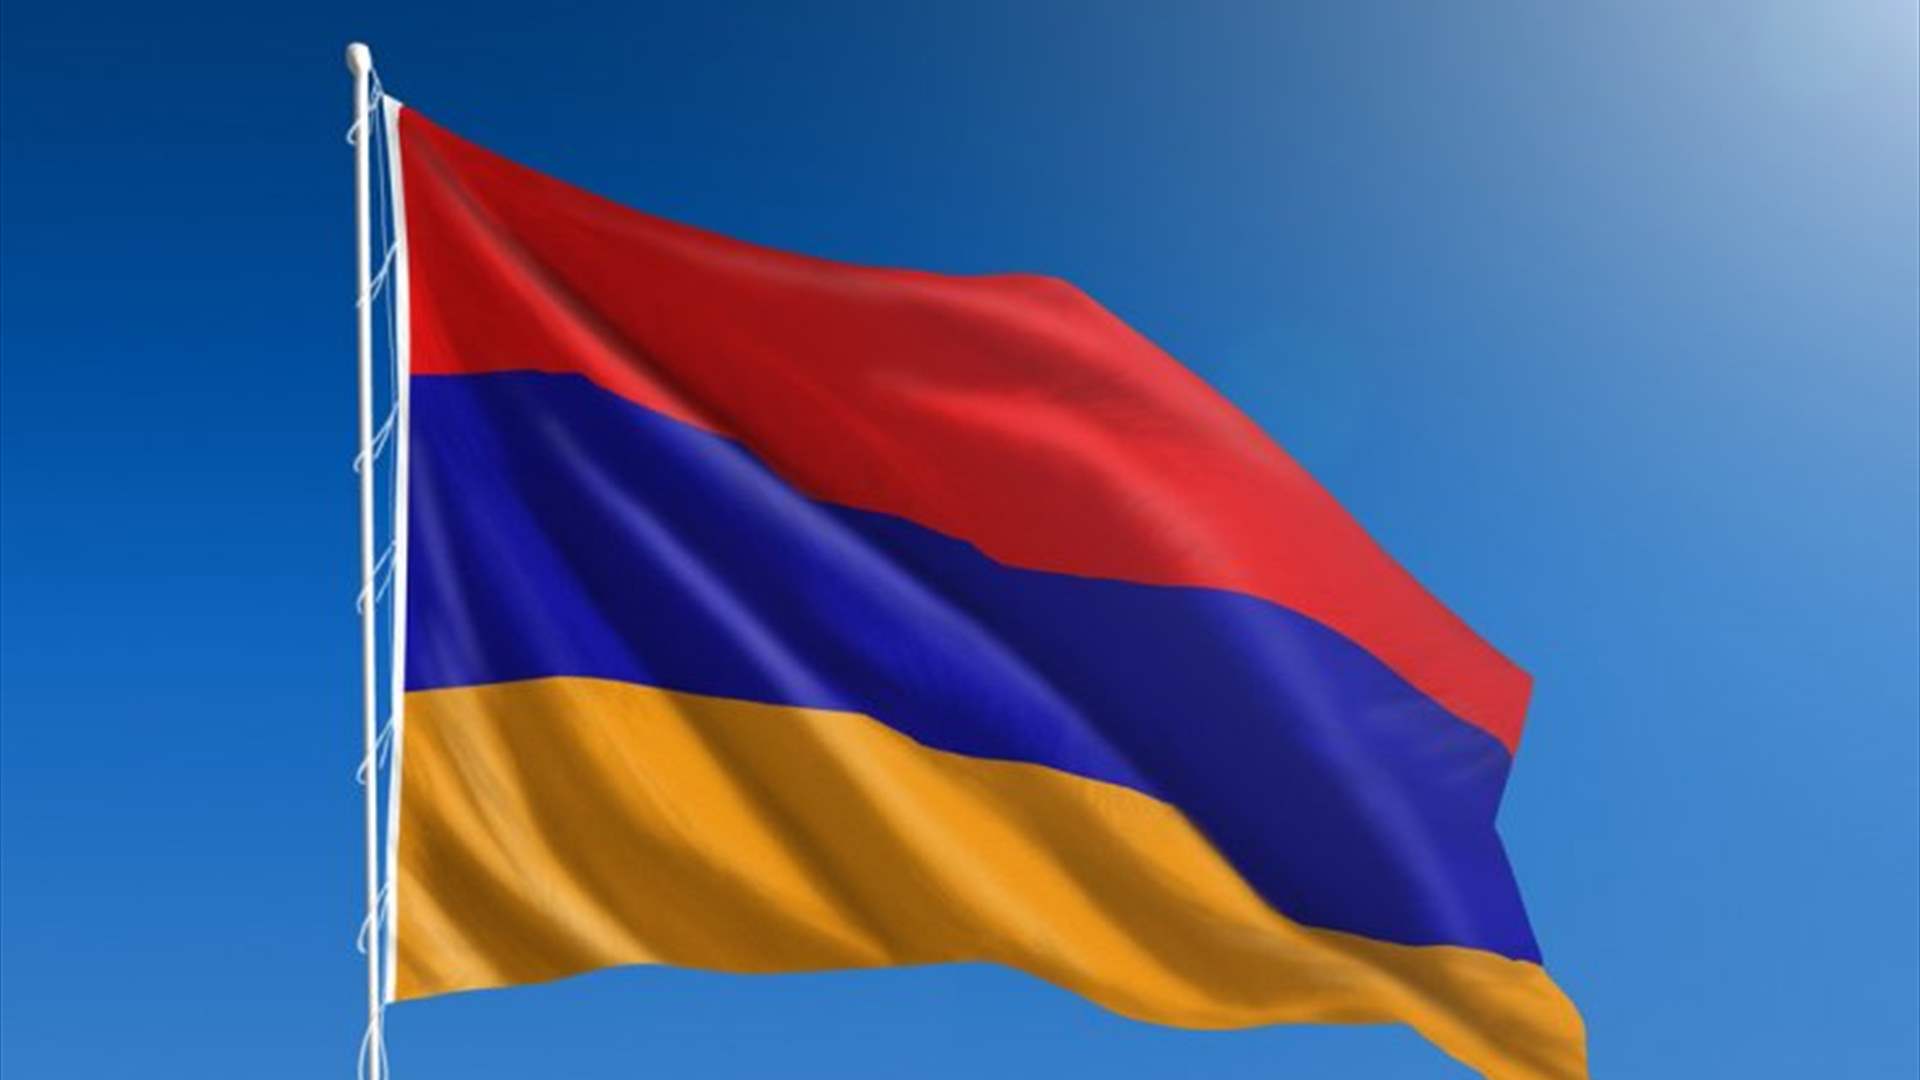 Protesters in Armenia demand PM resign over border villages dispute